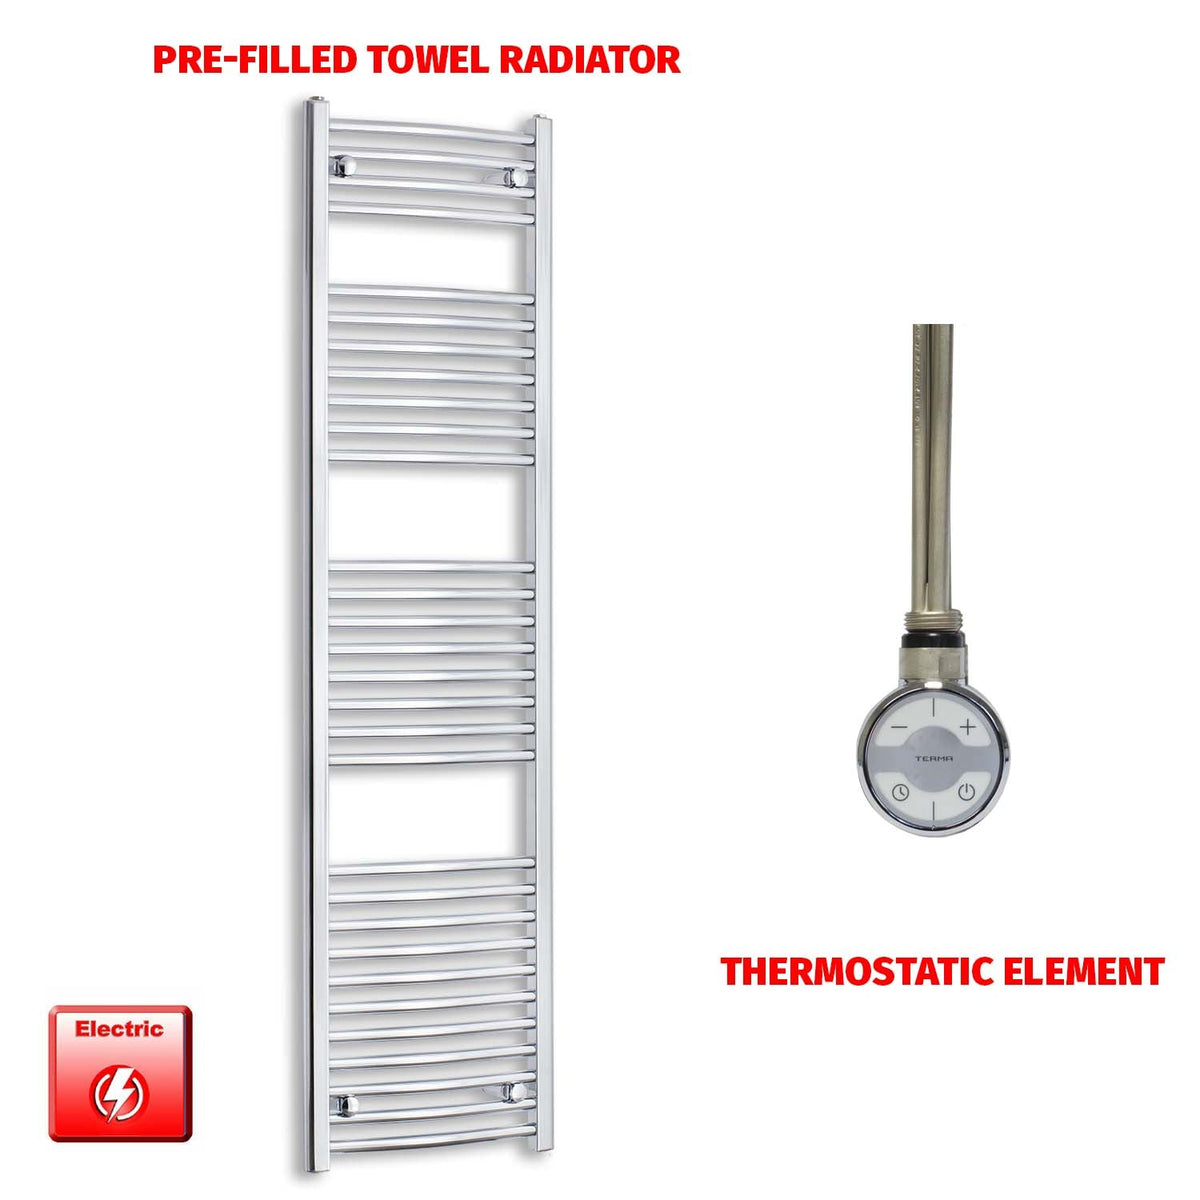 1700 x 450 Pre-Filled Electric Heated Towel Radiator Straight or Curved Chrome MOA Thermostatic element no timer